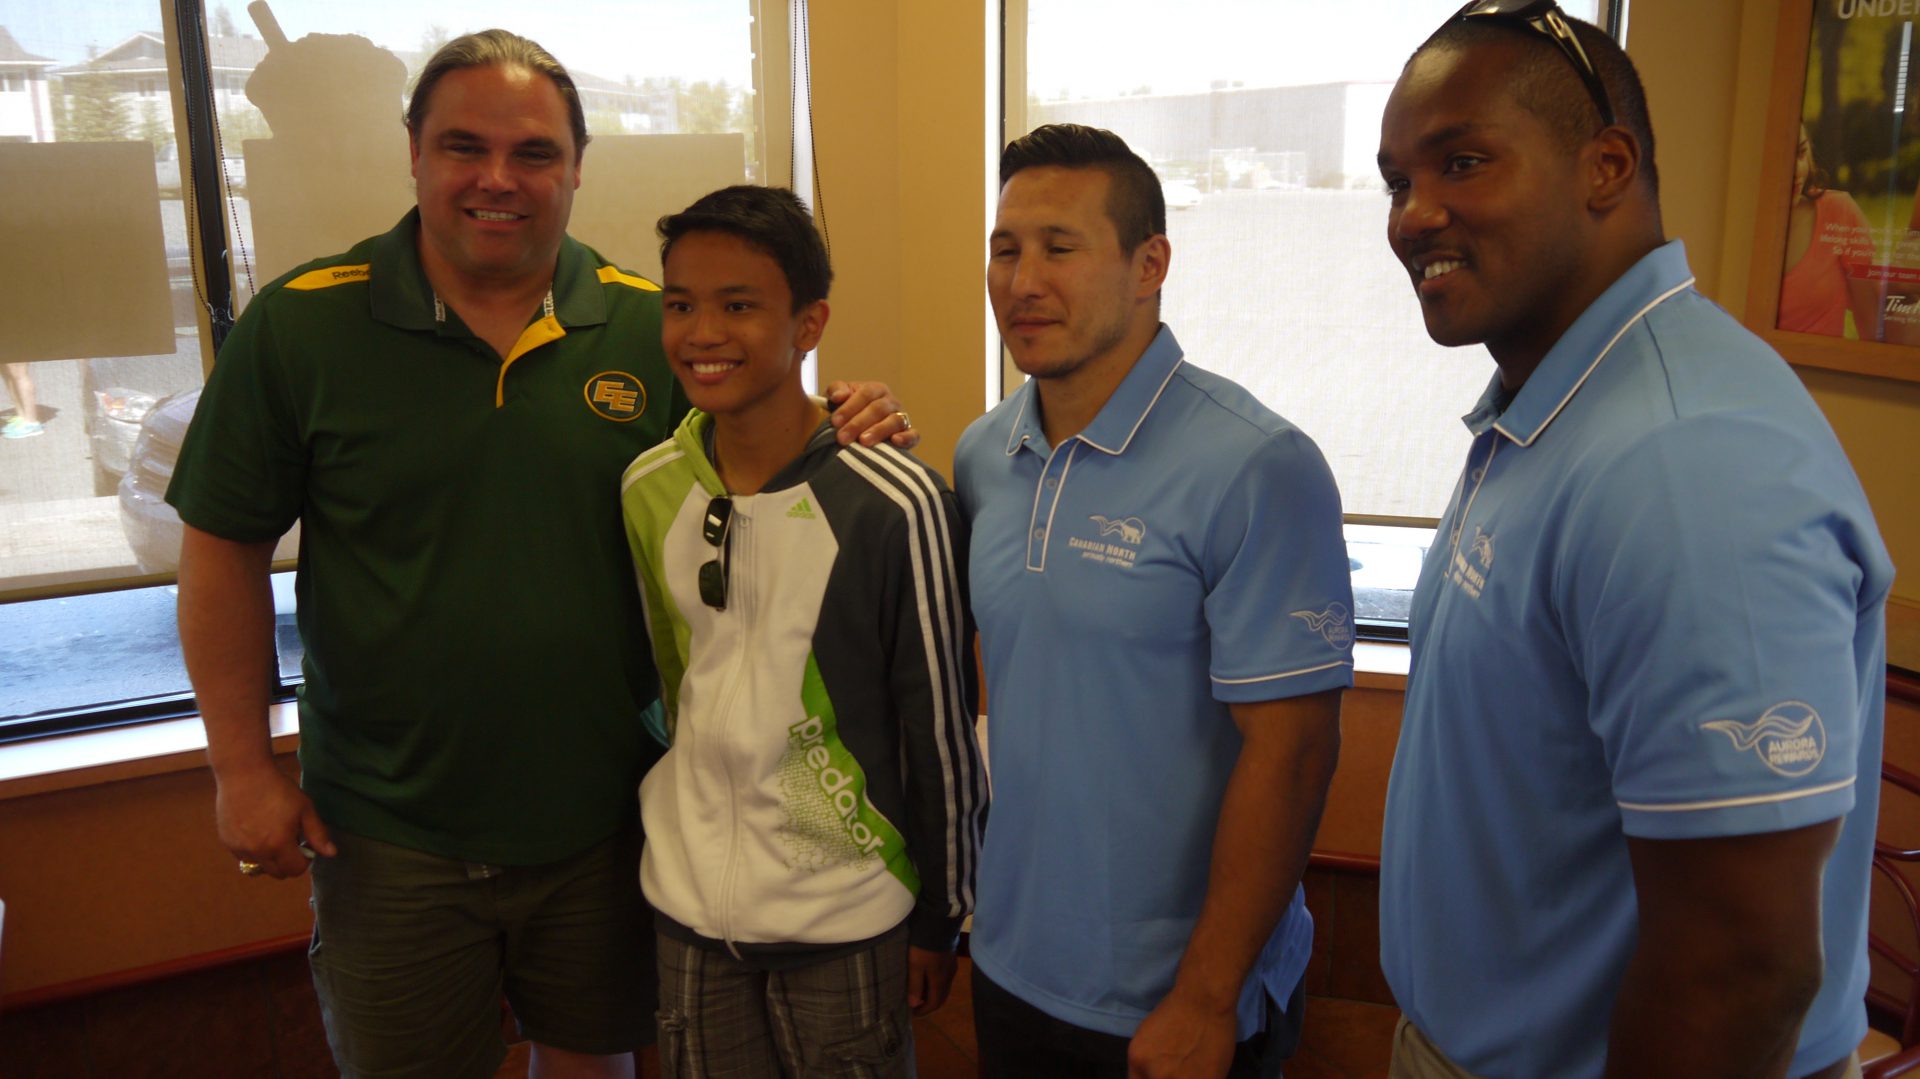 Jed Roberts, Rob Brown and Jordin Tootoo pose with a fan. 